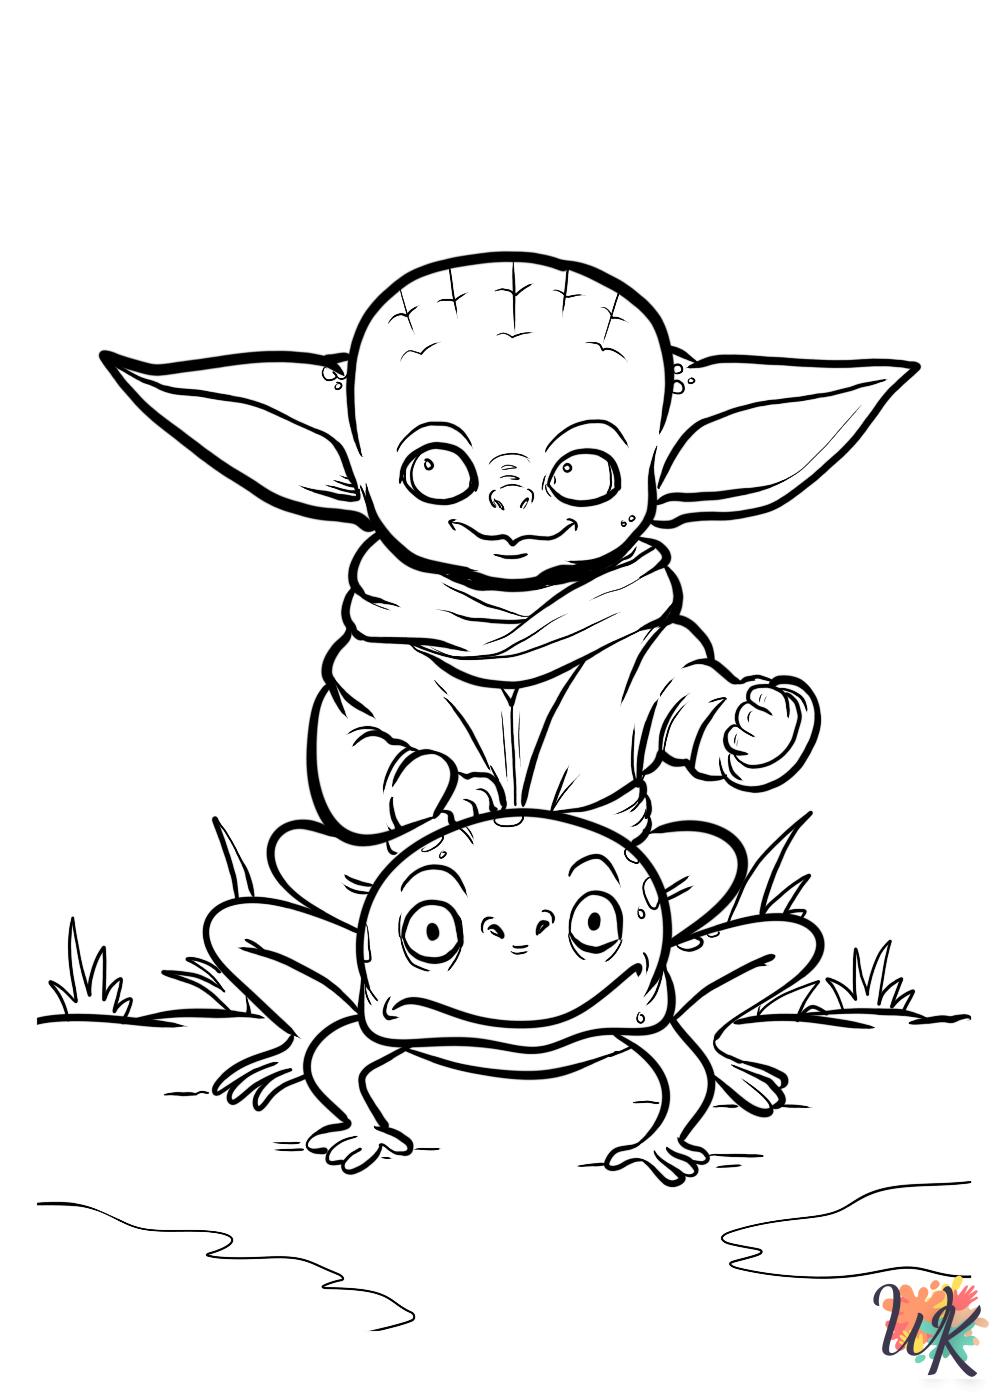 Baby Yoda coloring pages for adults